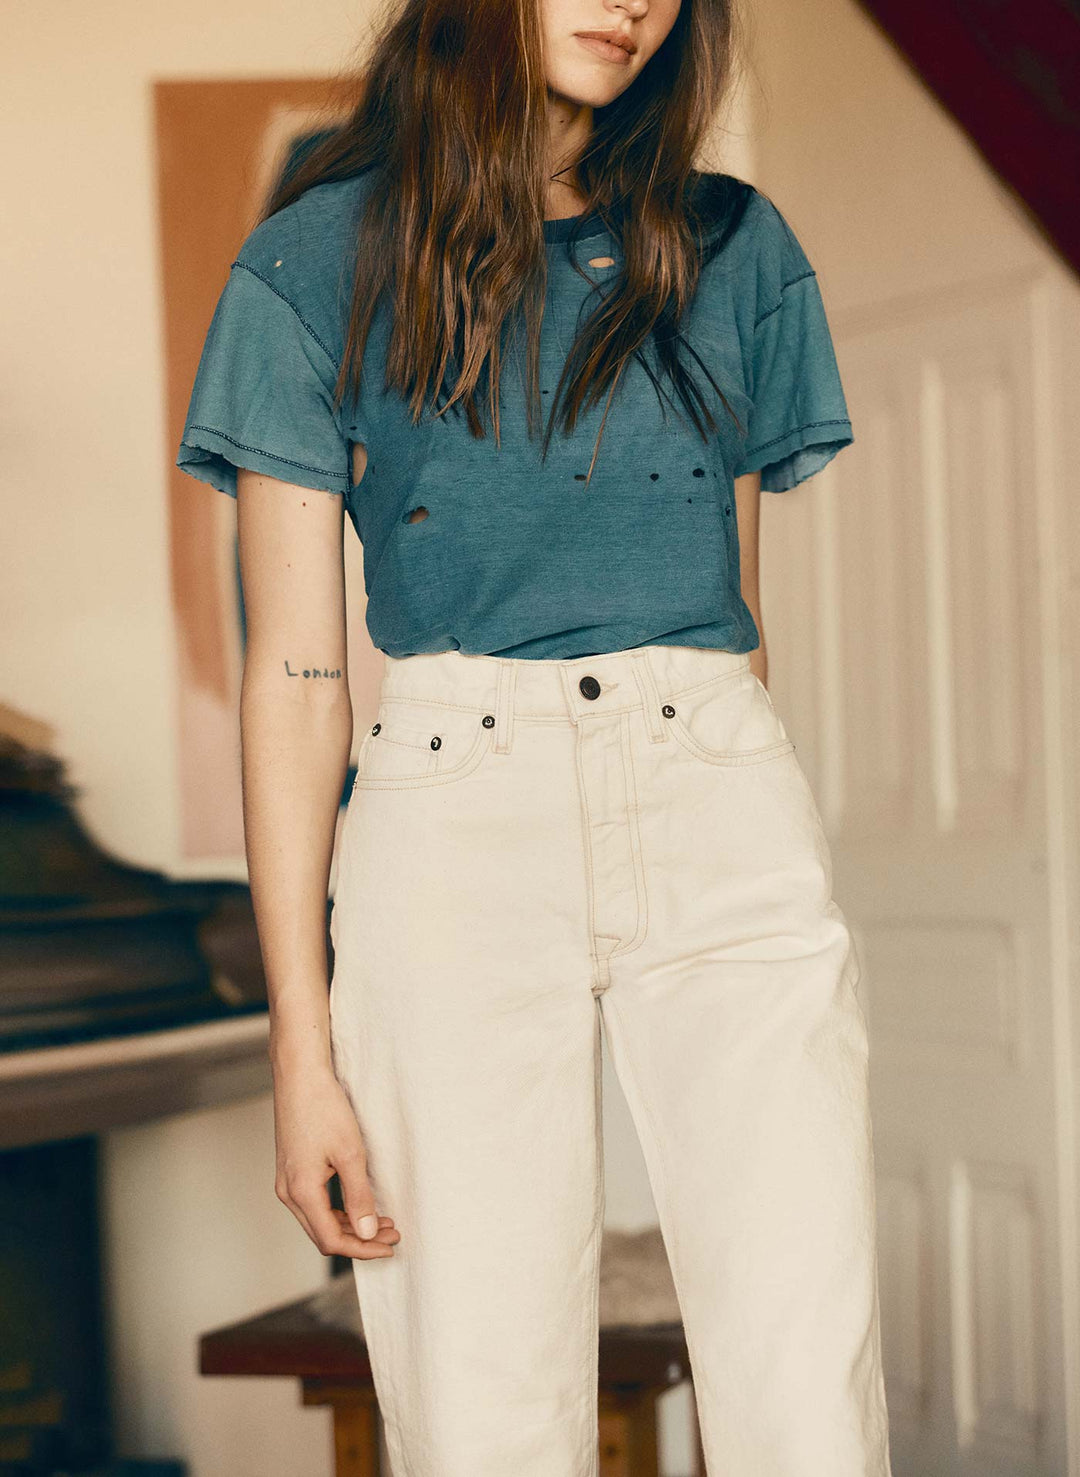 a woman wearing a blue shirt and white pants